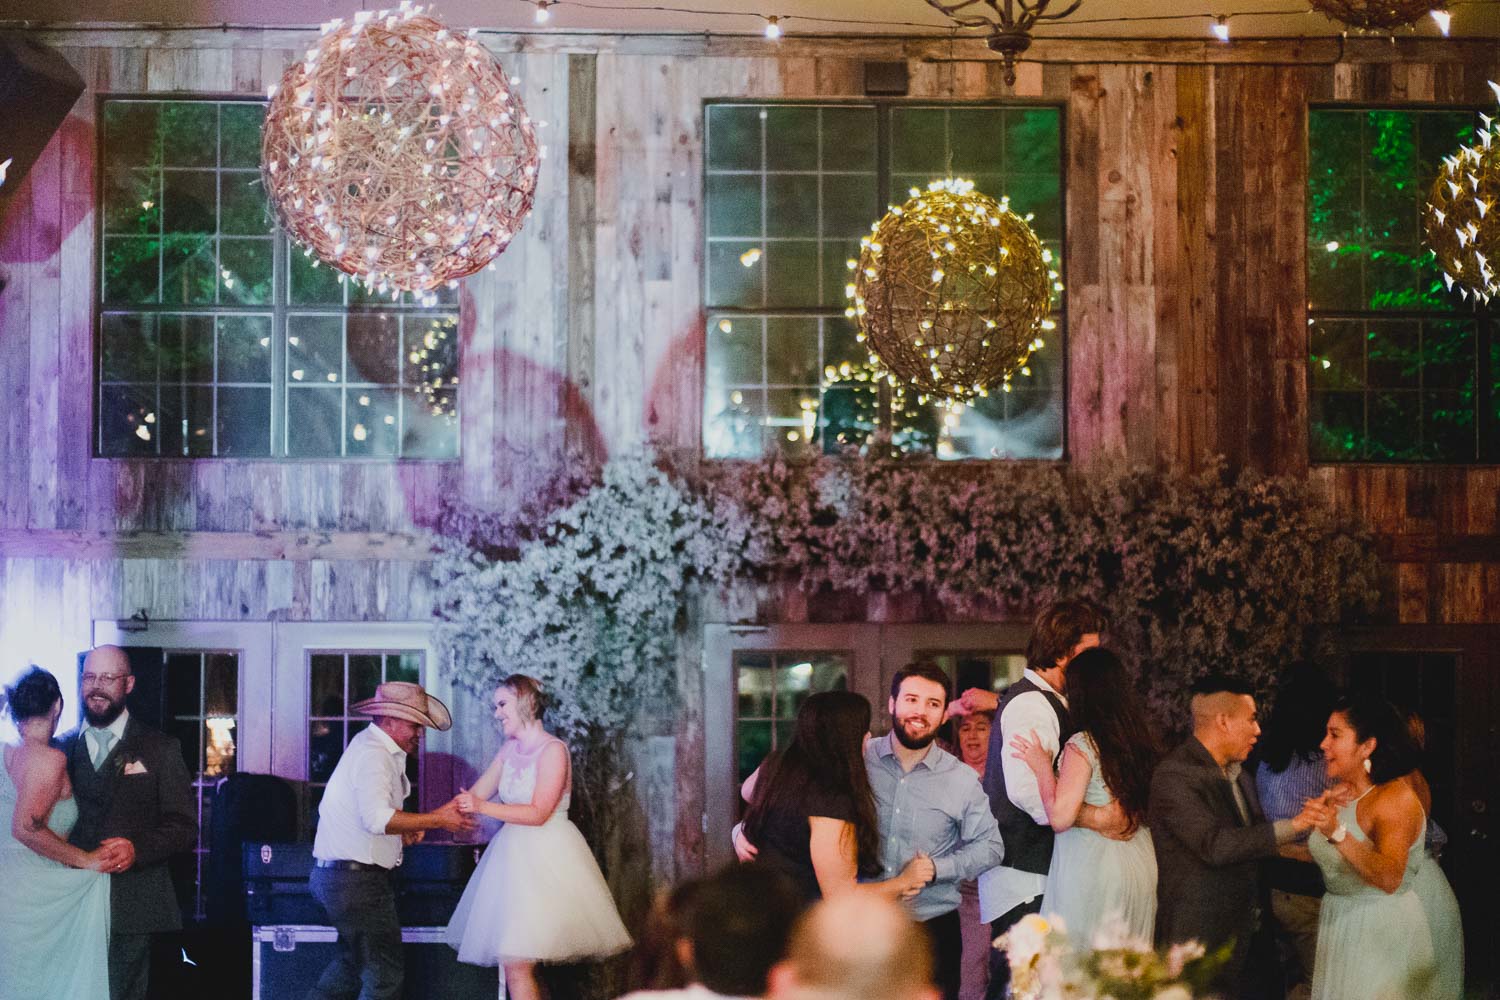 Wide shot shows bridal party and guests dancing RUSTIC BARN WEDDING at VISTA WEST RANCH DRIPPING SPRINGS _ BRANDI + AJ-75